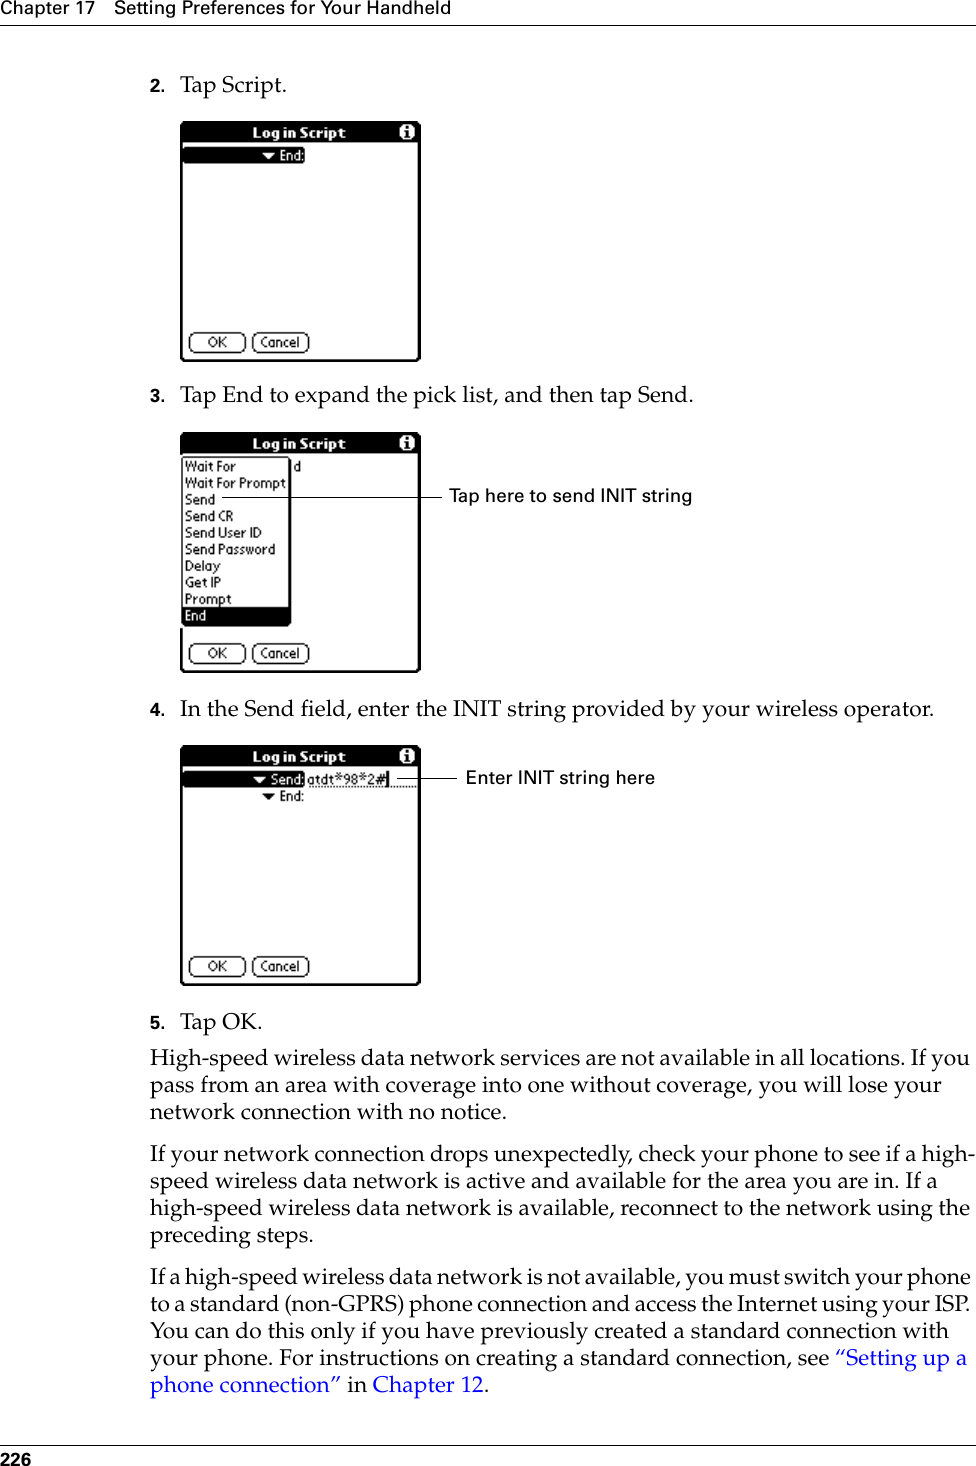 Chapter 17 Setting Preferences for Your Handheld2262. Tap Script.3. Tap End to expand the pick list, and then tap Send.4. In the Send field, enter the INIT string provided by your wireless operator.5. Tap OK.High-speed wireless data network services are not available in all locations. If you pass from an area with coverage into one without coverage, you will lose your network connection with no notice. If your network connection drops unexpectedly, check your phone to see if a high-speed wireless data network is active and available for the area you are in. If a high-speed wireless data network is available, reconnect to the network using the preceding steps. If a high-speed wireless data network is not available, you must switch your phone to a standard (non-GPRS) phone connection and access the Internet using your ISP. You can do this only if you have previously created a standard connection with your phone. For instructions on creating a standard connection, see “Setting up a phone connection” in Chapter 12.Tap here to send INIT stringEnter INIT string herePalm, Inc. Confidential